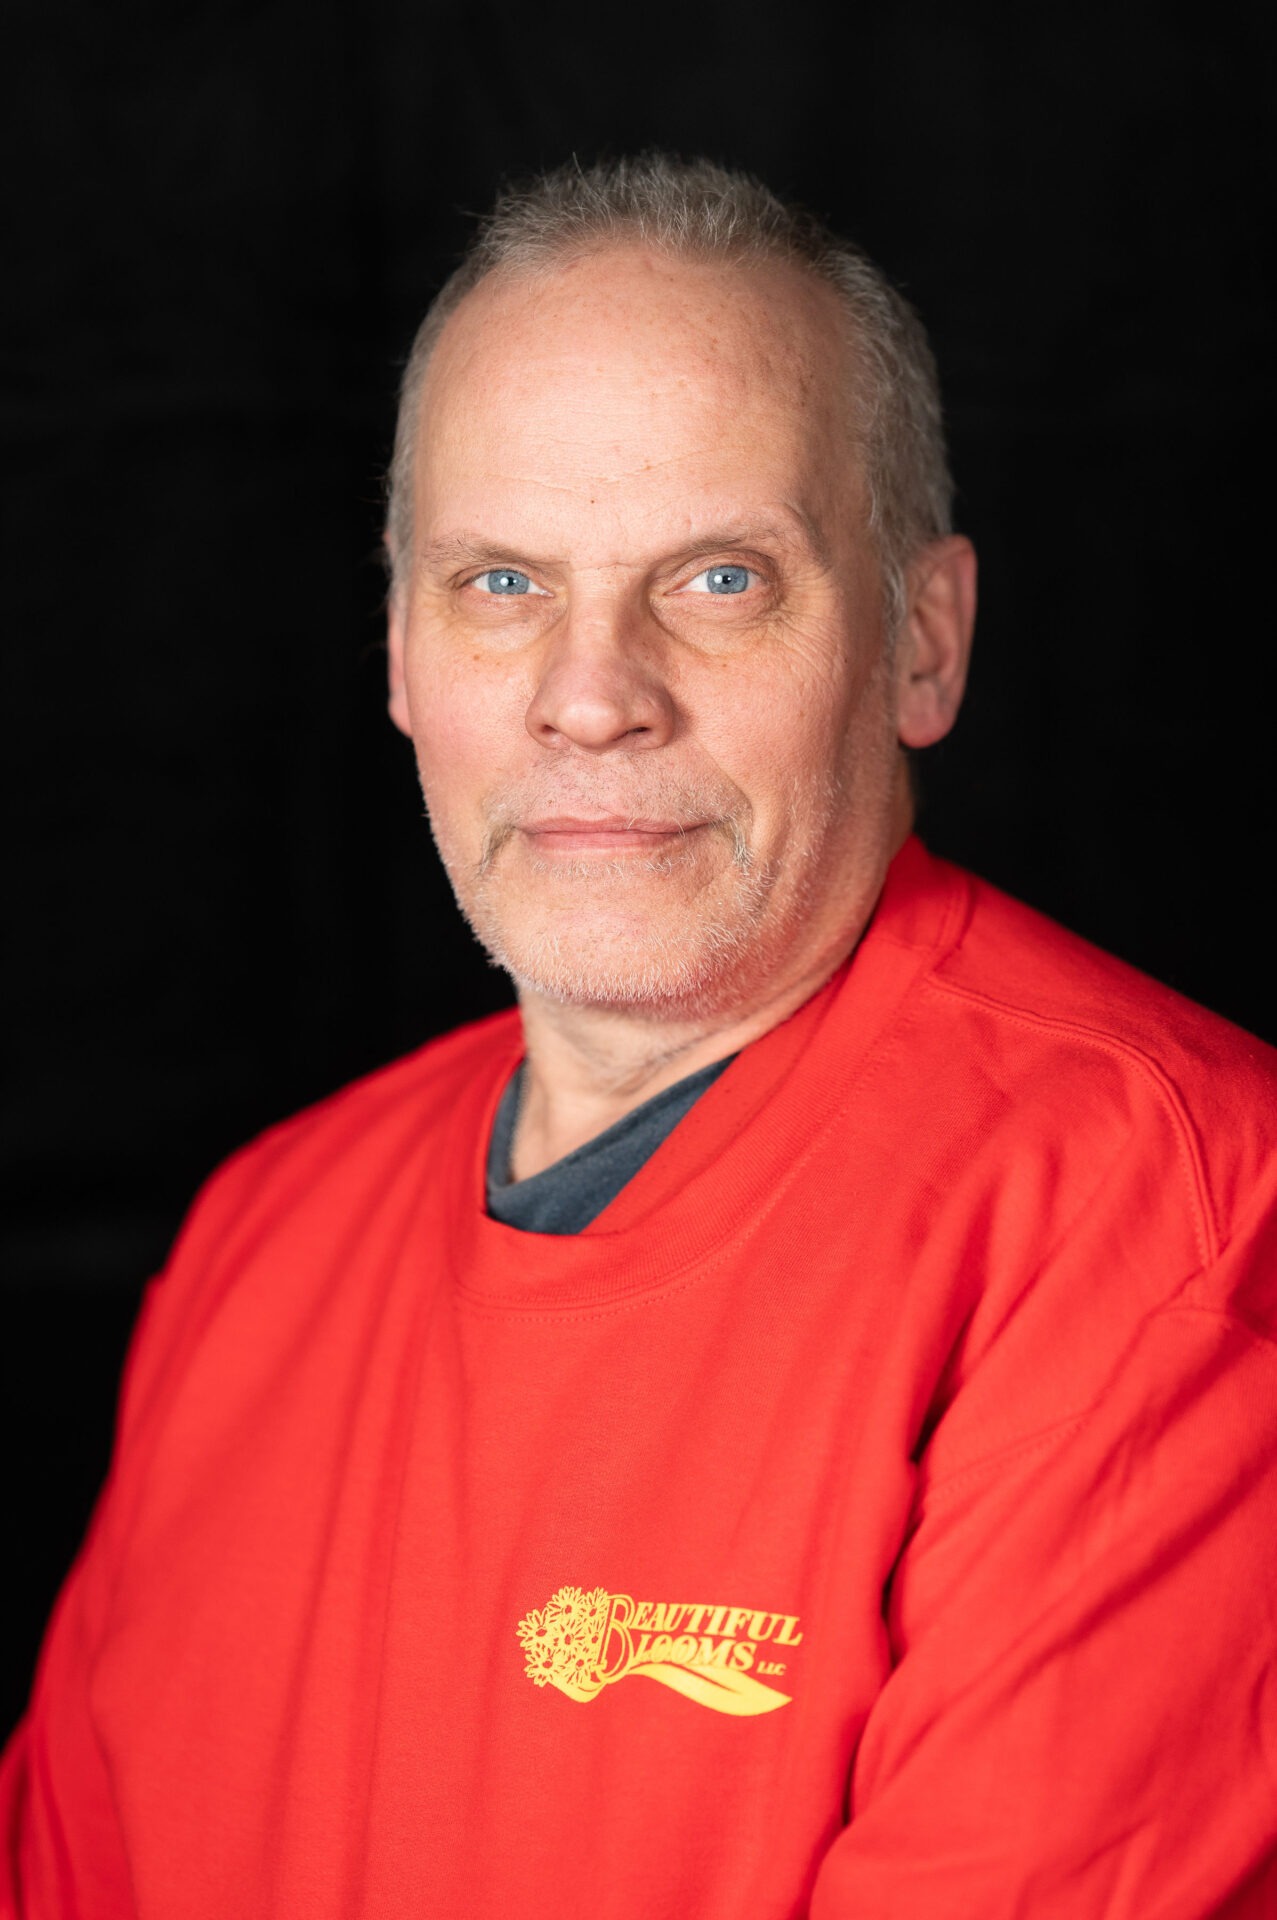 A person with light complexion and short hair, wearing a red shirt with a logo, stands before a black background, offering a faint smile.